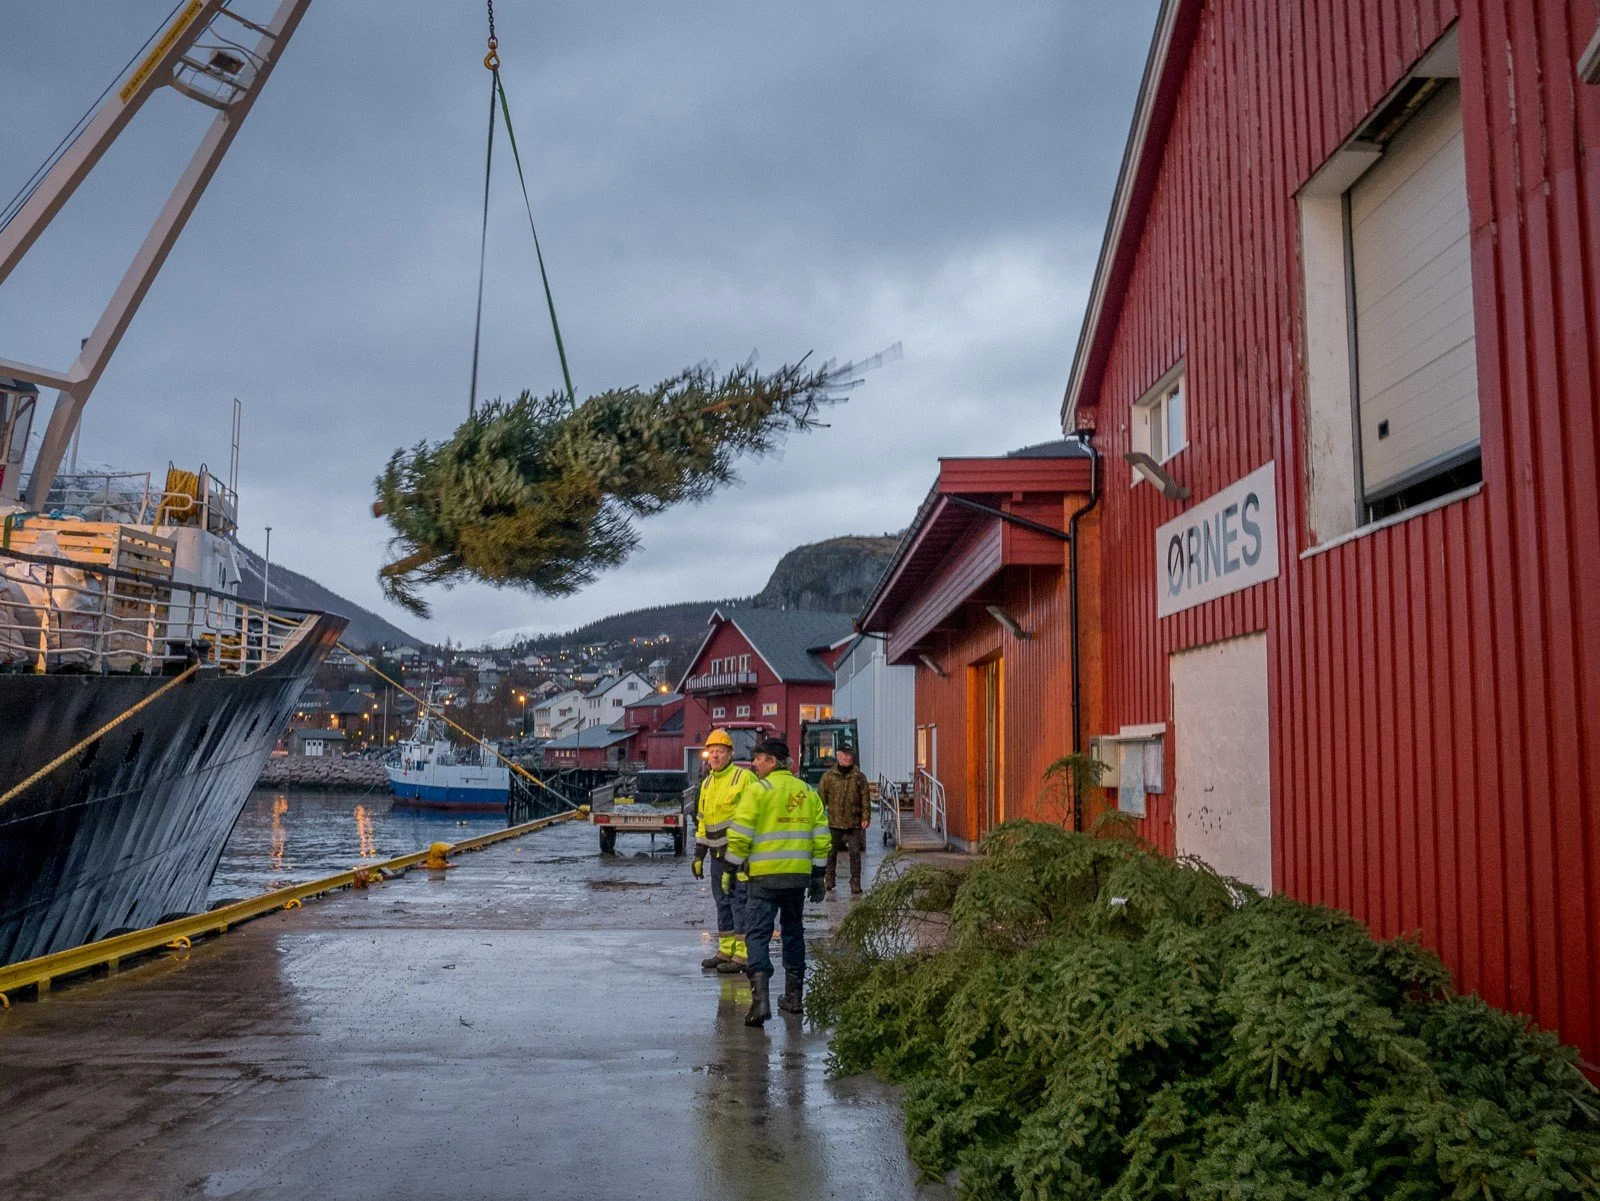 Lots of spruce trees are loaded on board Ørnes